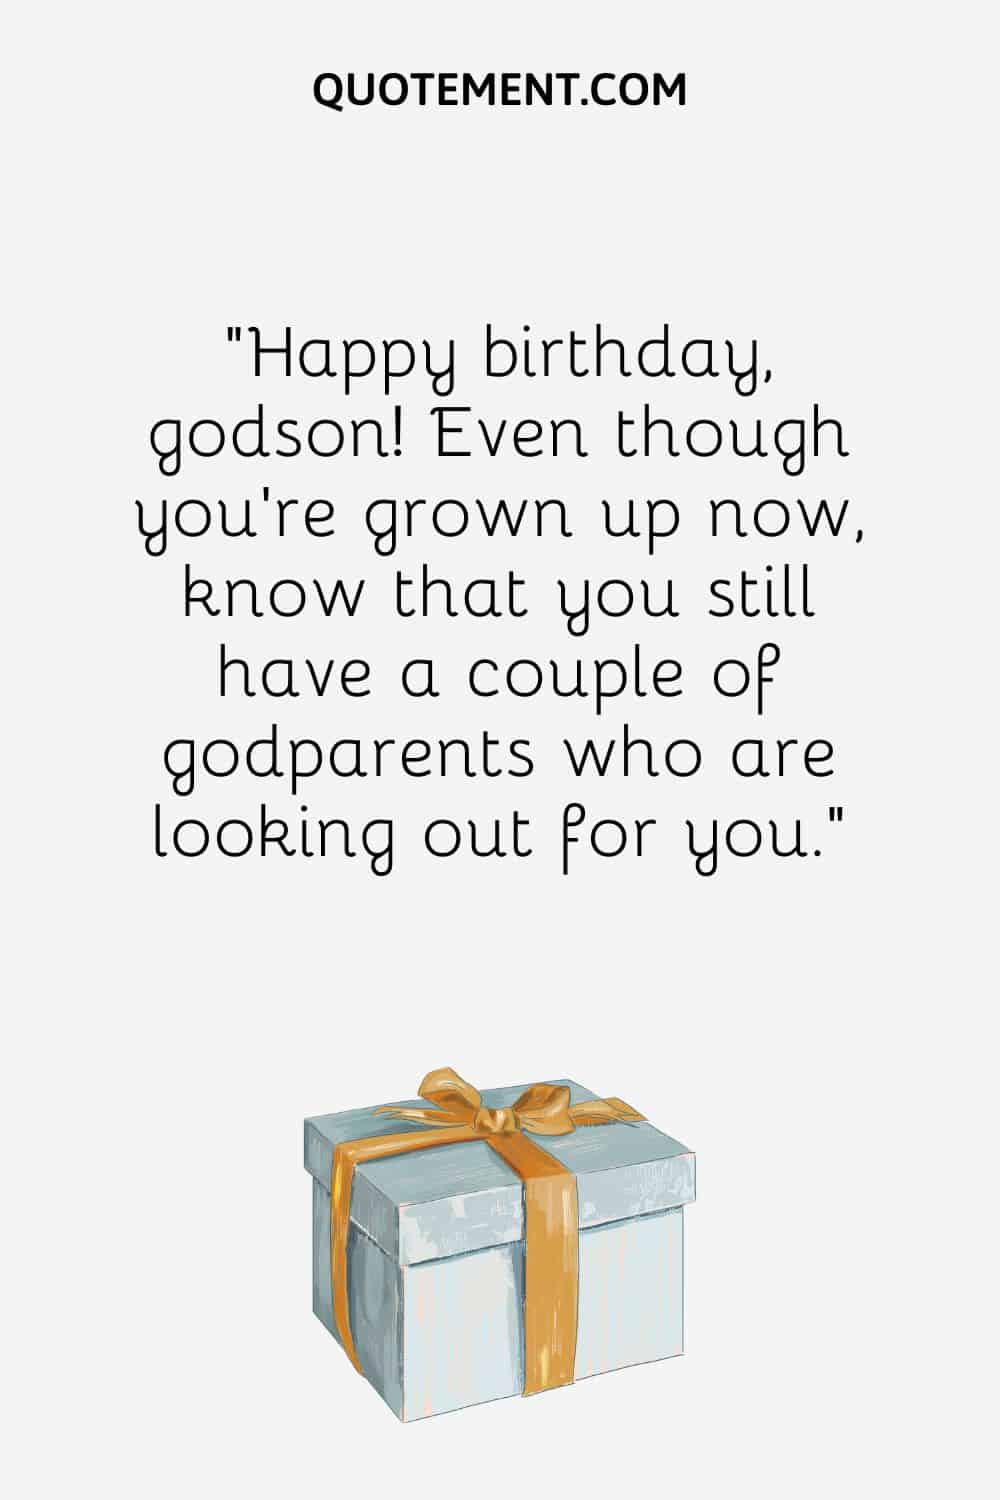 “Happy birthday, godson! Even though you’re grown up now, know that you still have a couple of godparents who are looking out for you.”